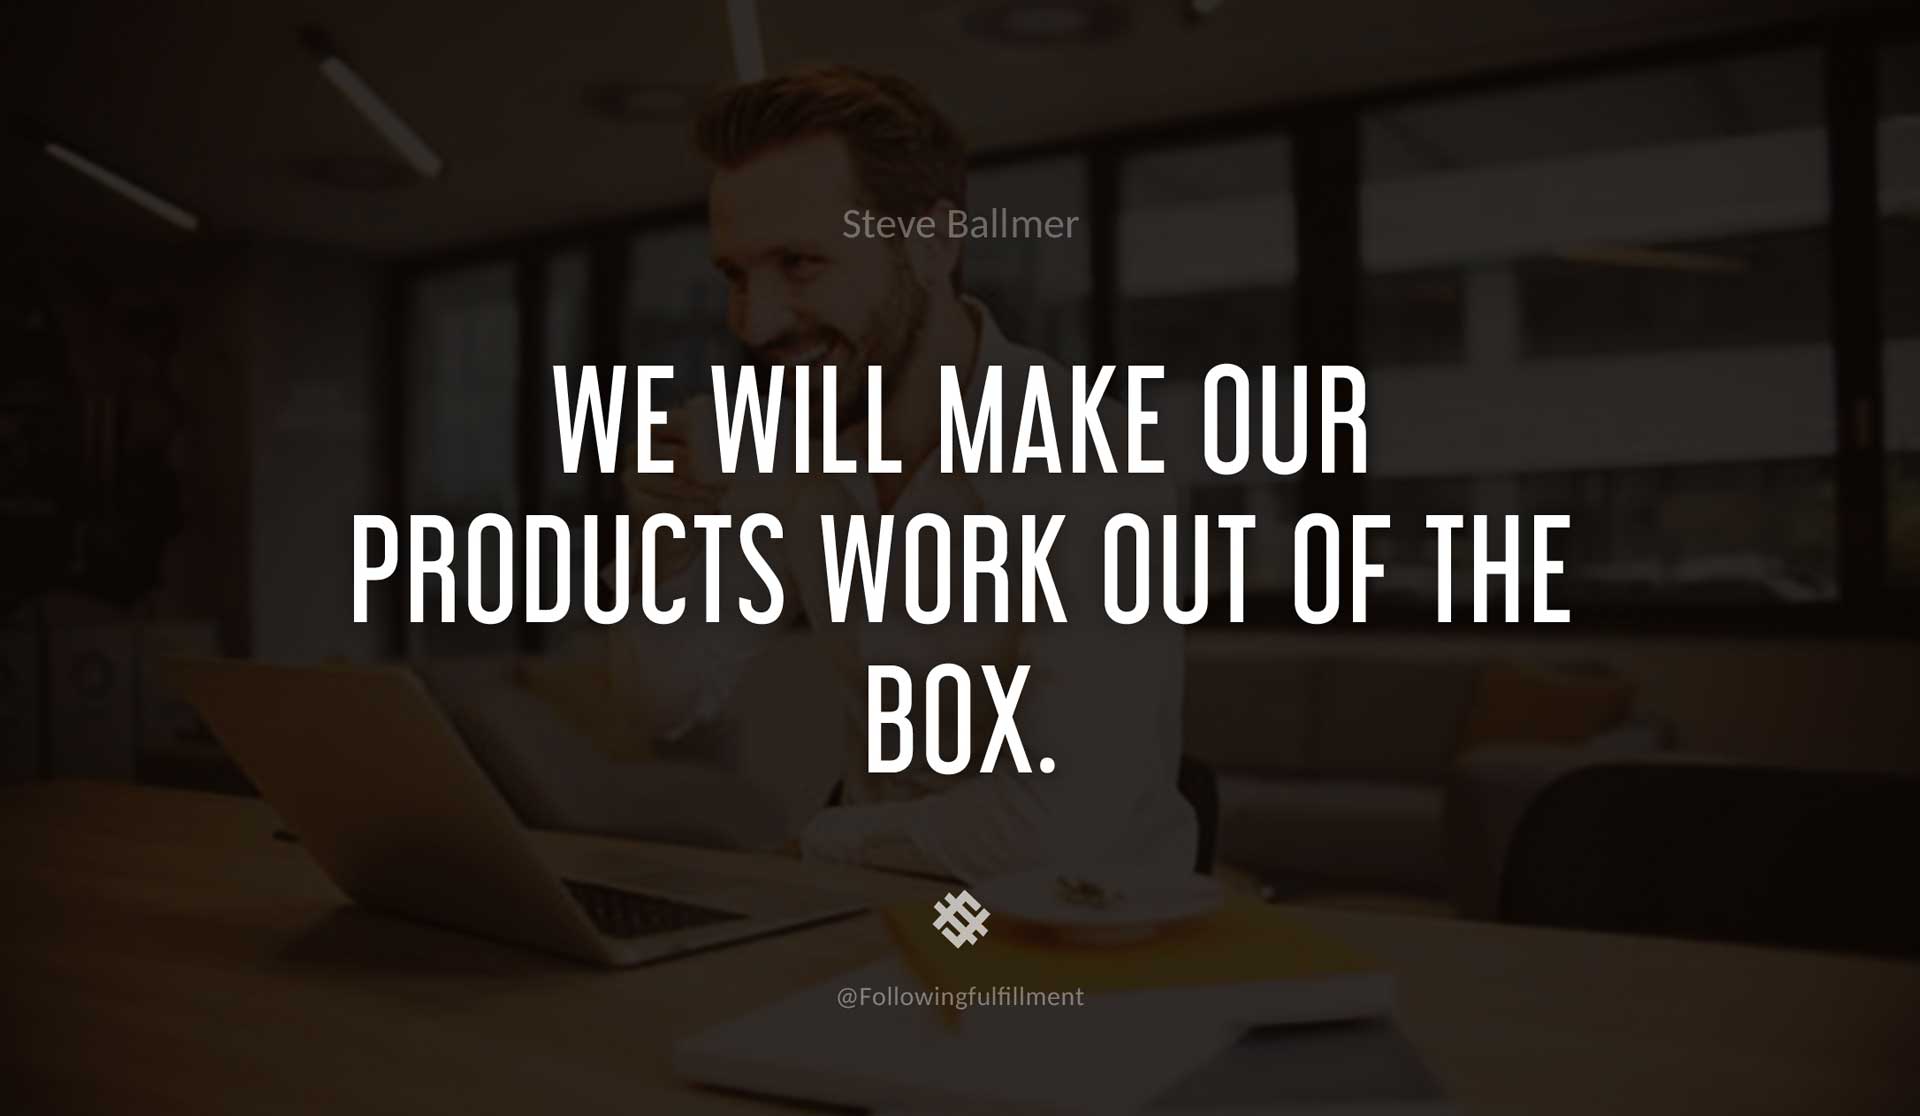 We-will-make-our-products-work-out-of-the-box.-STEVE-BALLMER-Quote.jpg